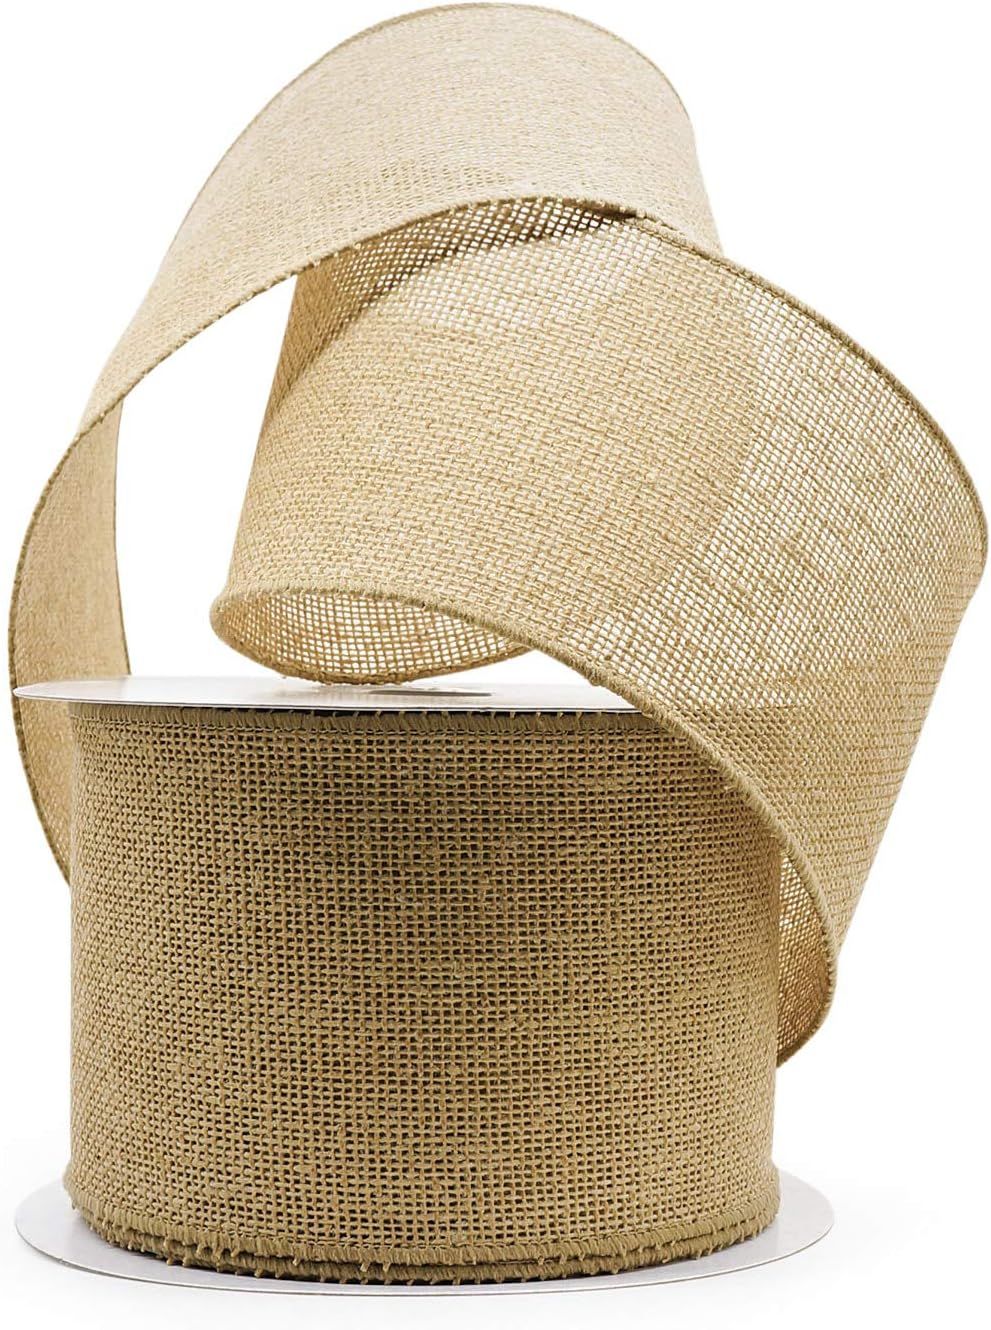 CT CRAFT LLC Burlap Wired Ribbon, 4inch x 20 Yards, Natural, Christmas, Home Decor, Gift Wrapping... | Amazon (US)